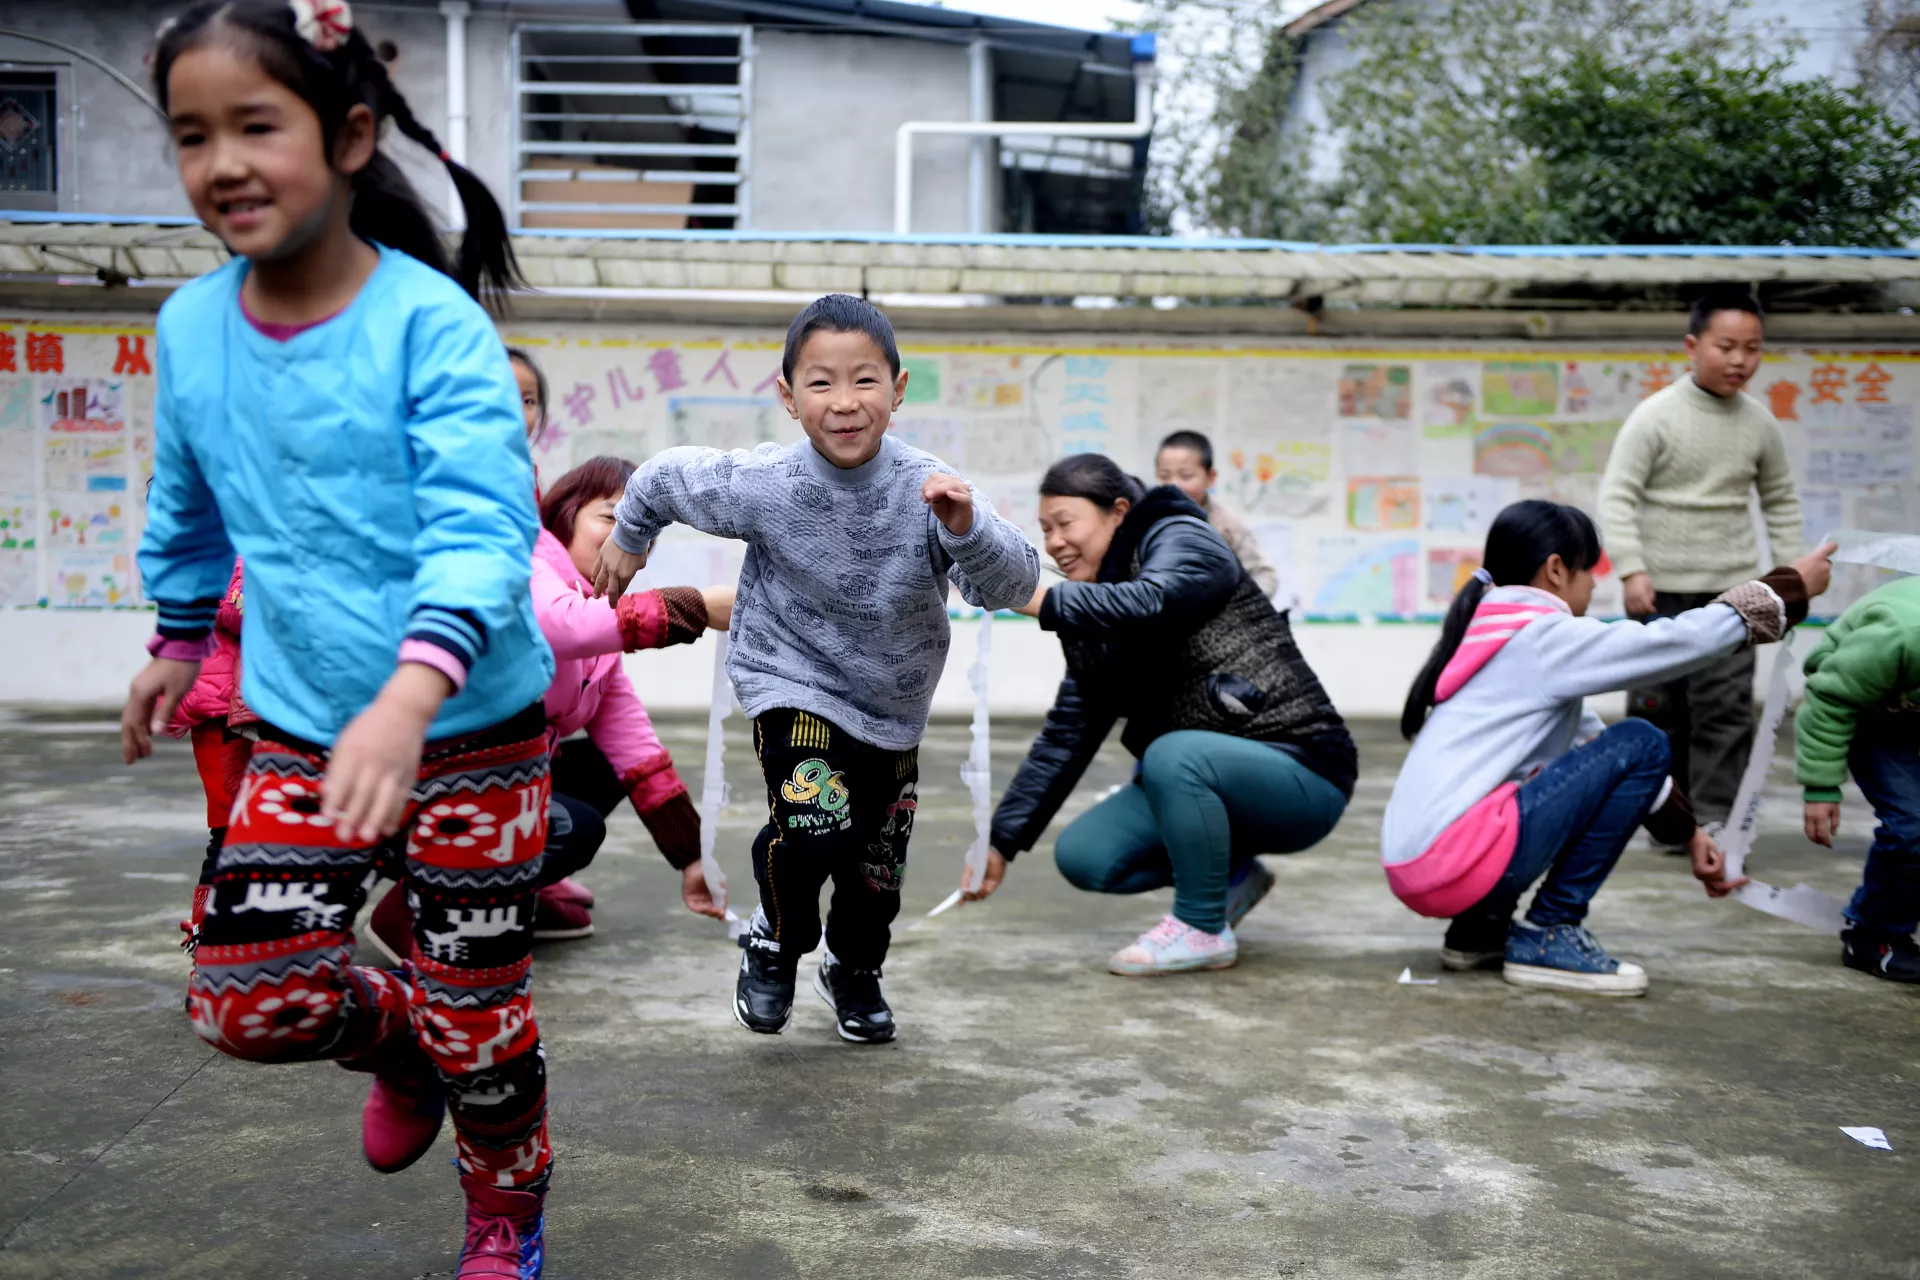 Boys and girls playing in school, China.